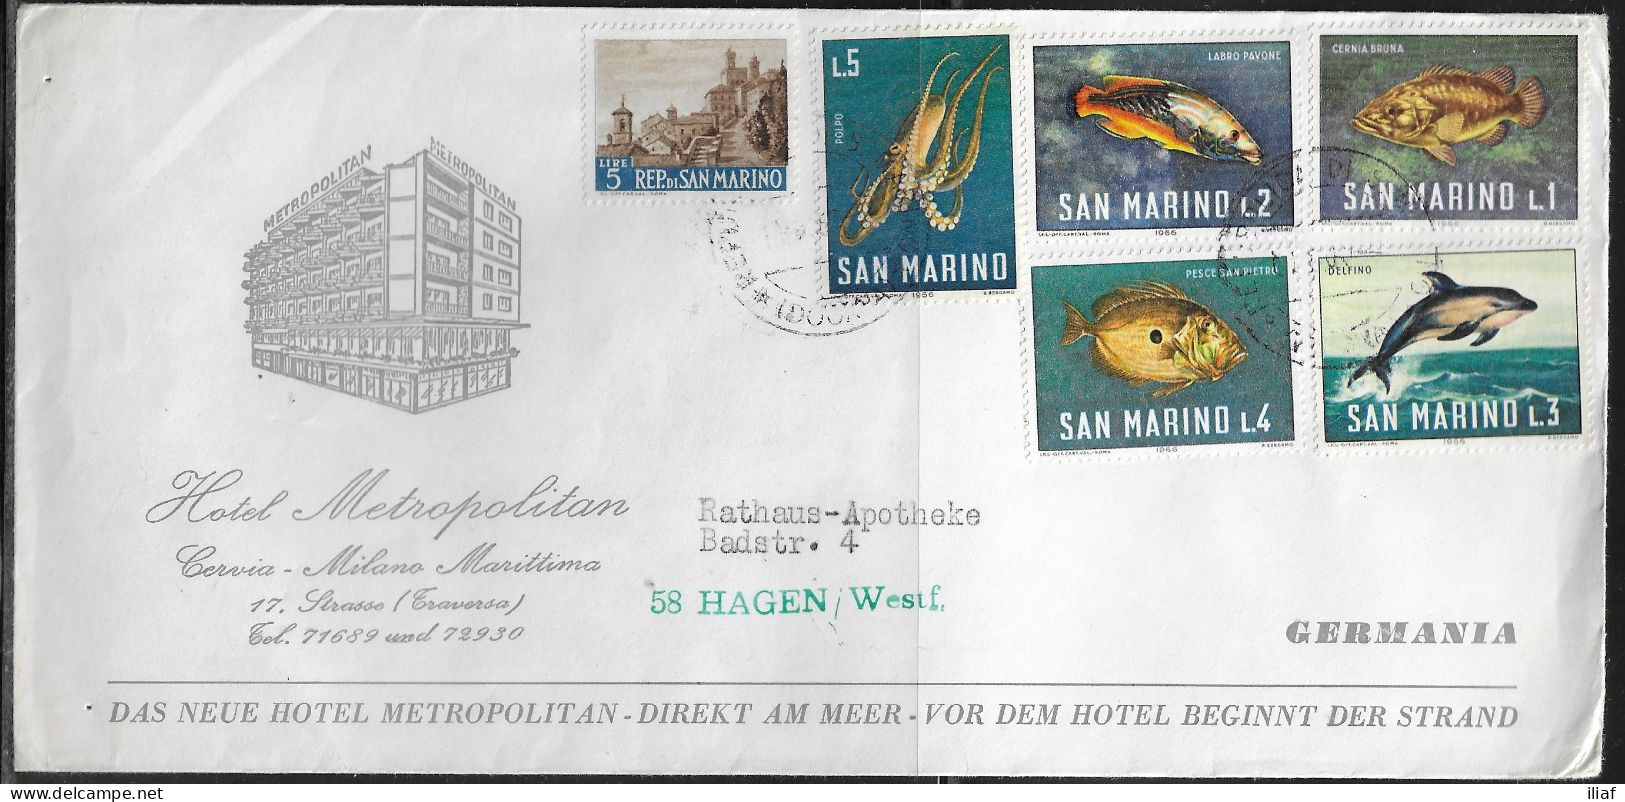 San Marino. Stamps Sc. 633, 643-647 On Letter From Hotel Metropolitan, Sent From Republica Di San Marino  To Germany. - Storia Postale